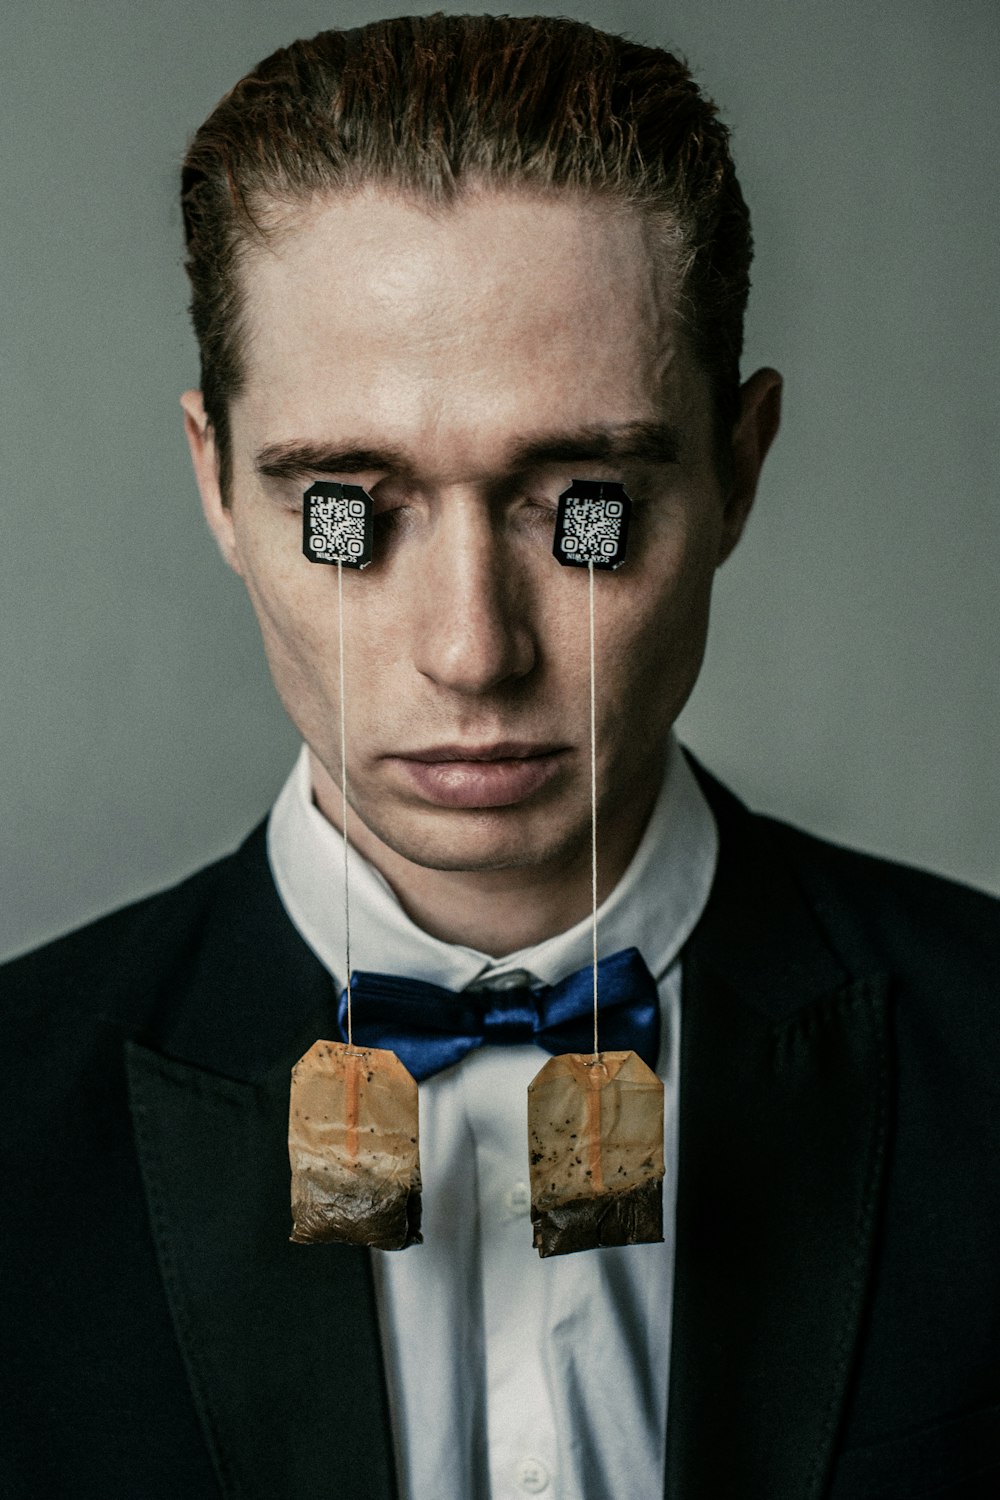 a man in a tuxedo with two pieces of bread attached to his ears